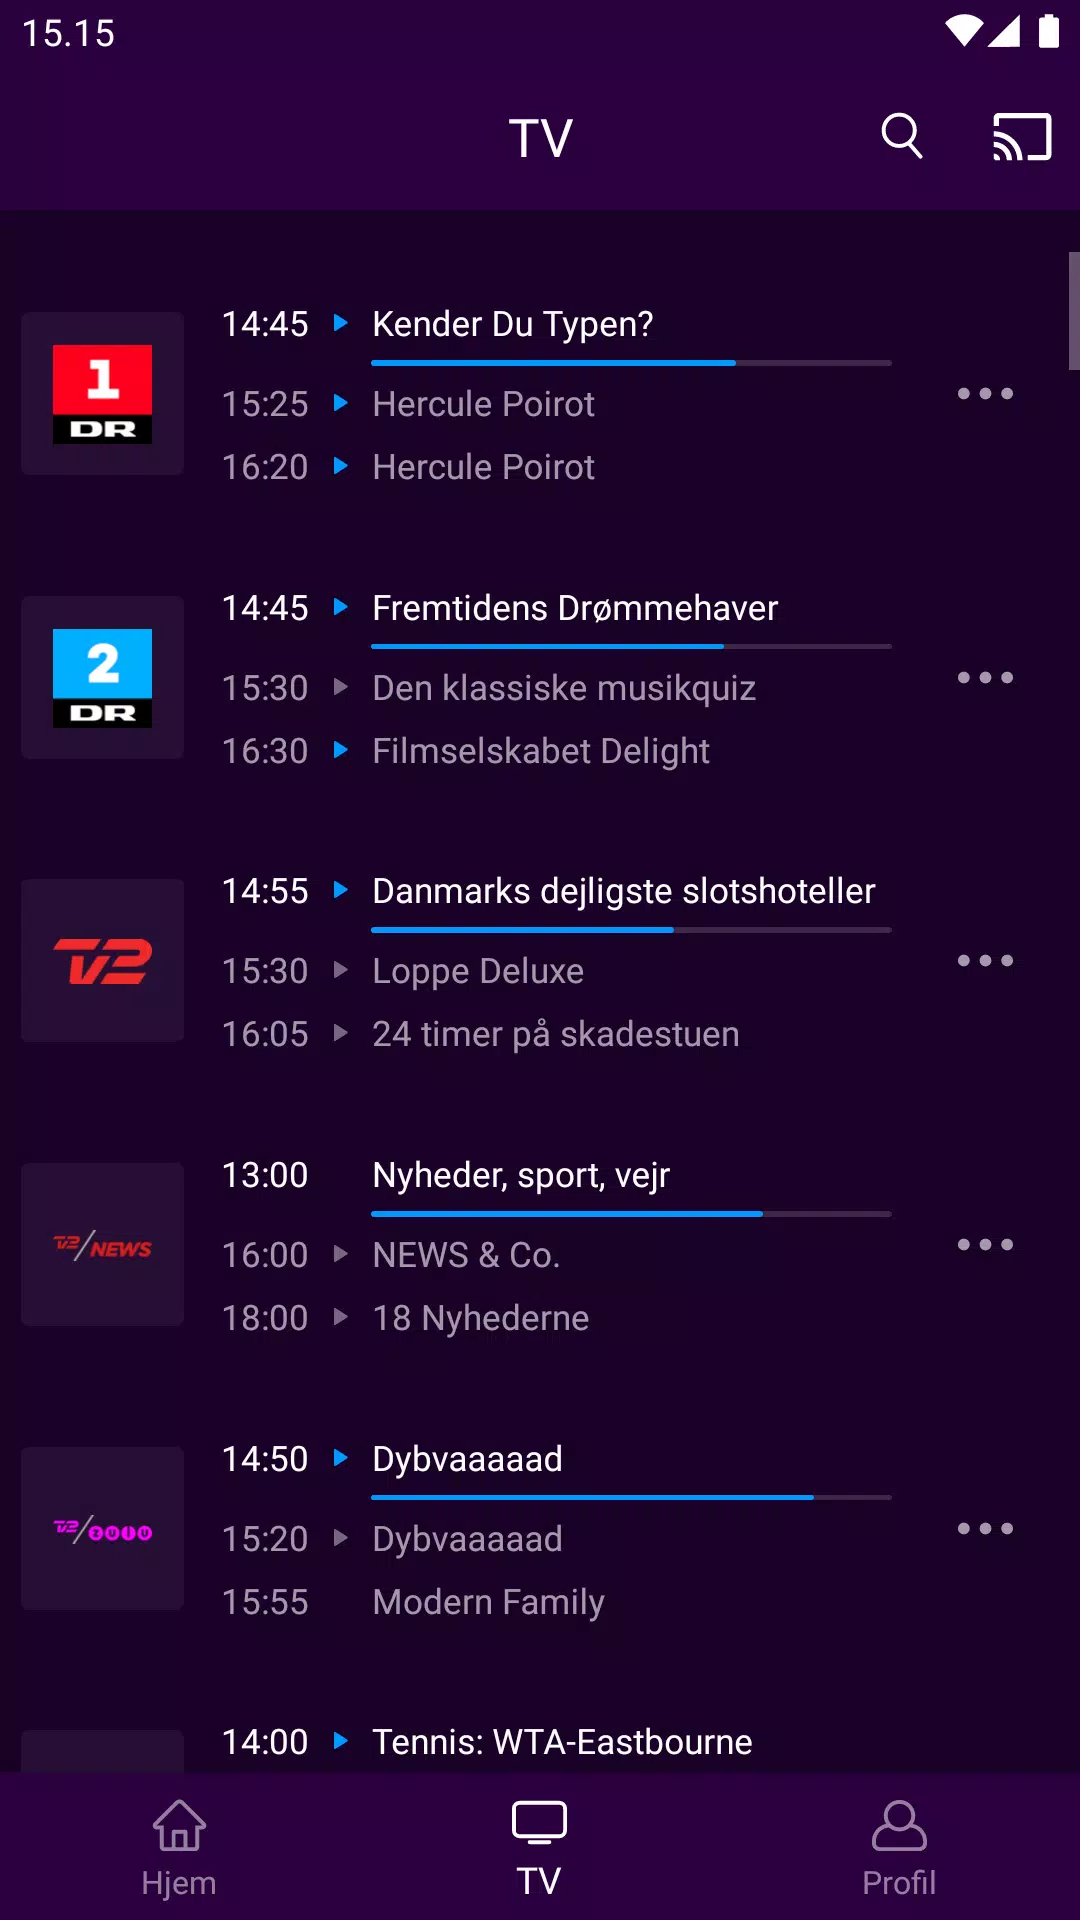 Telia TV APK for Android Download